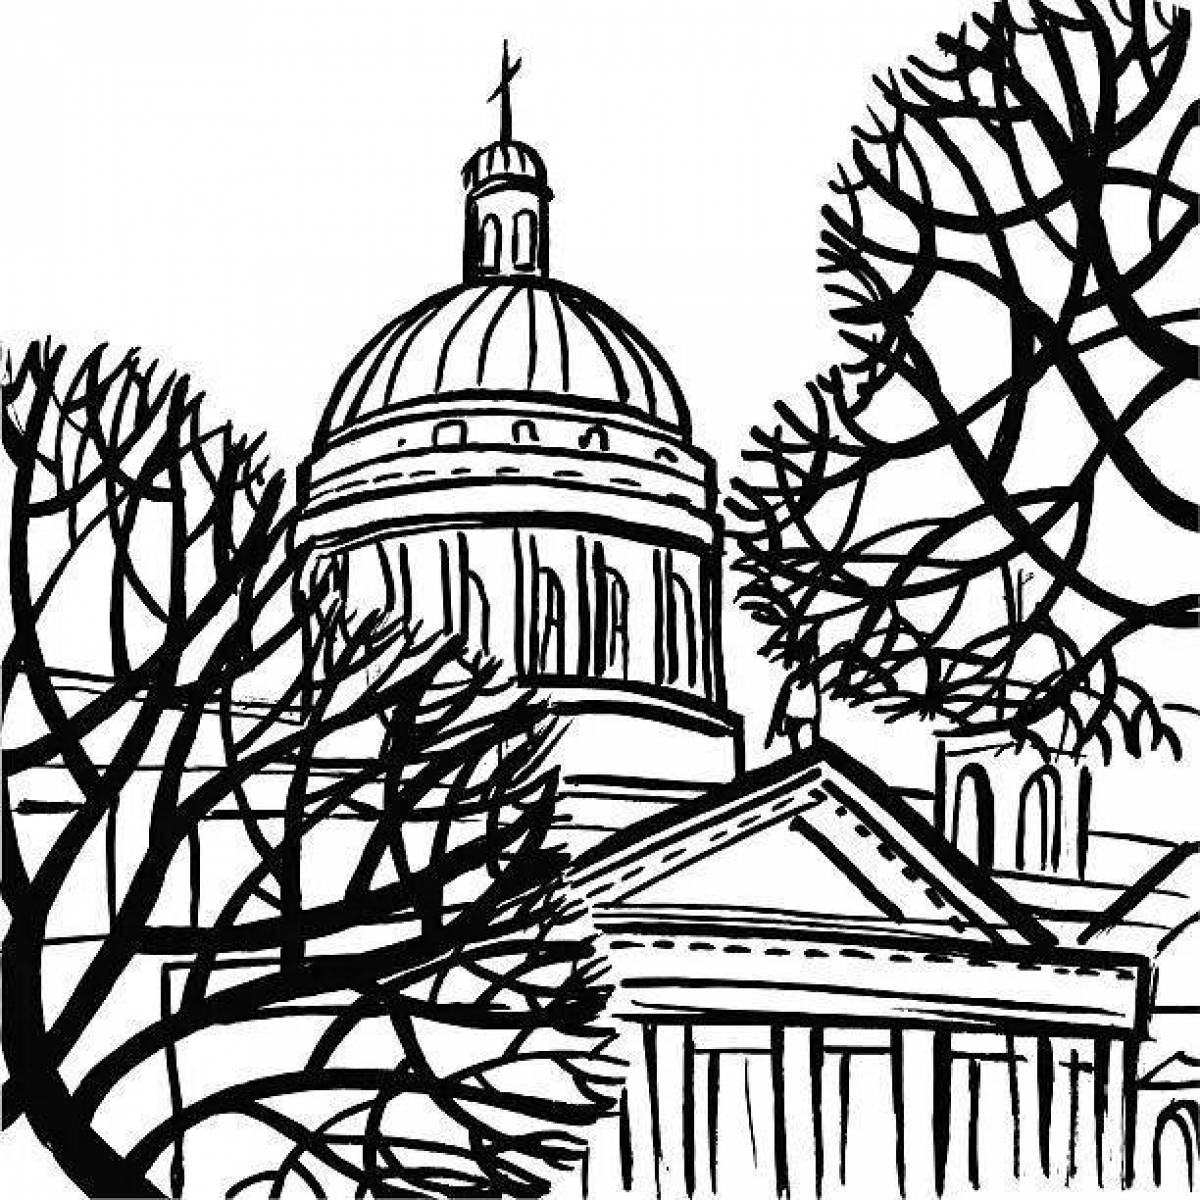 The majestically illuminated St. Isaac's Cathedral coloring book